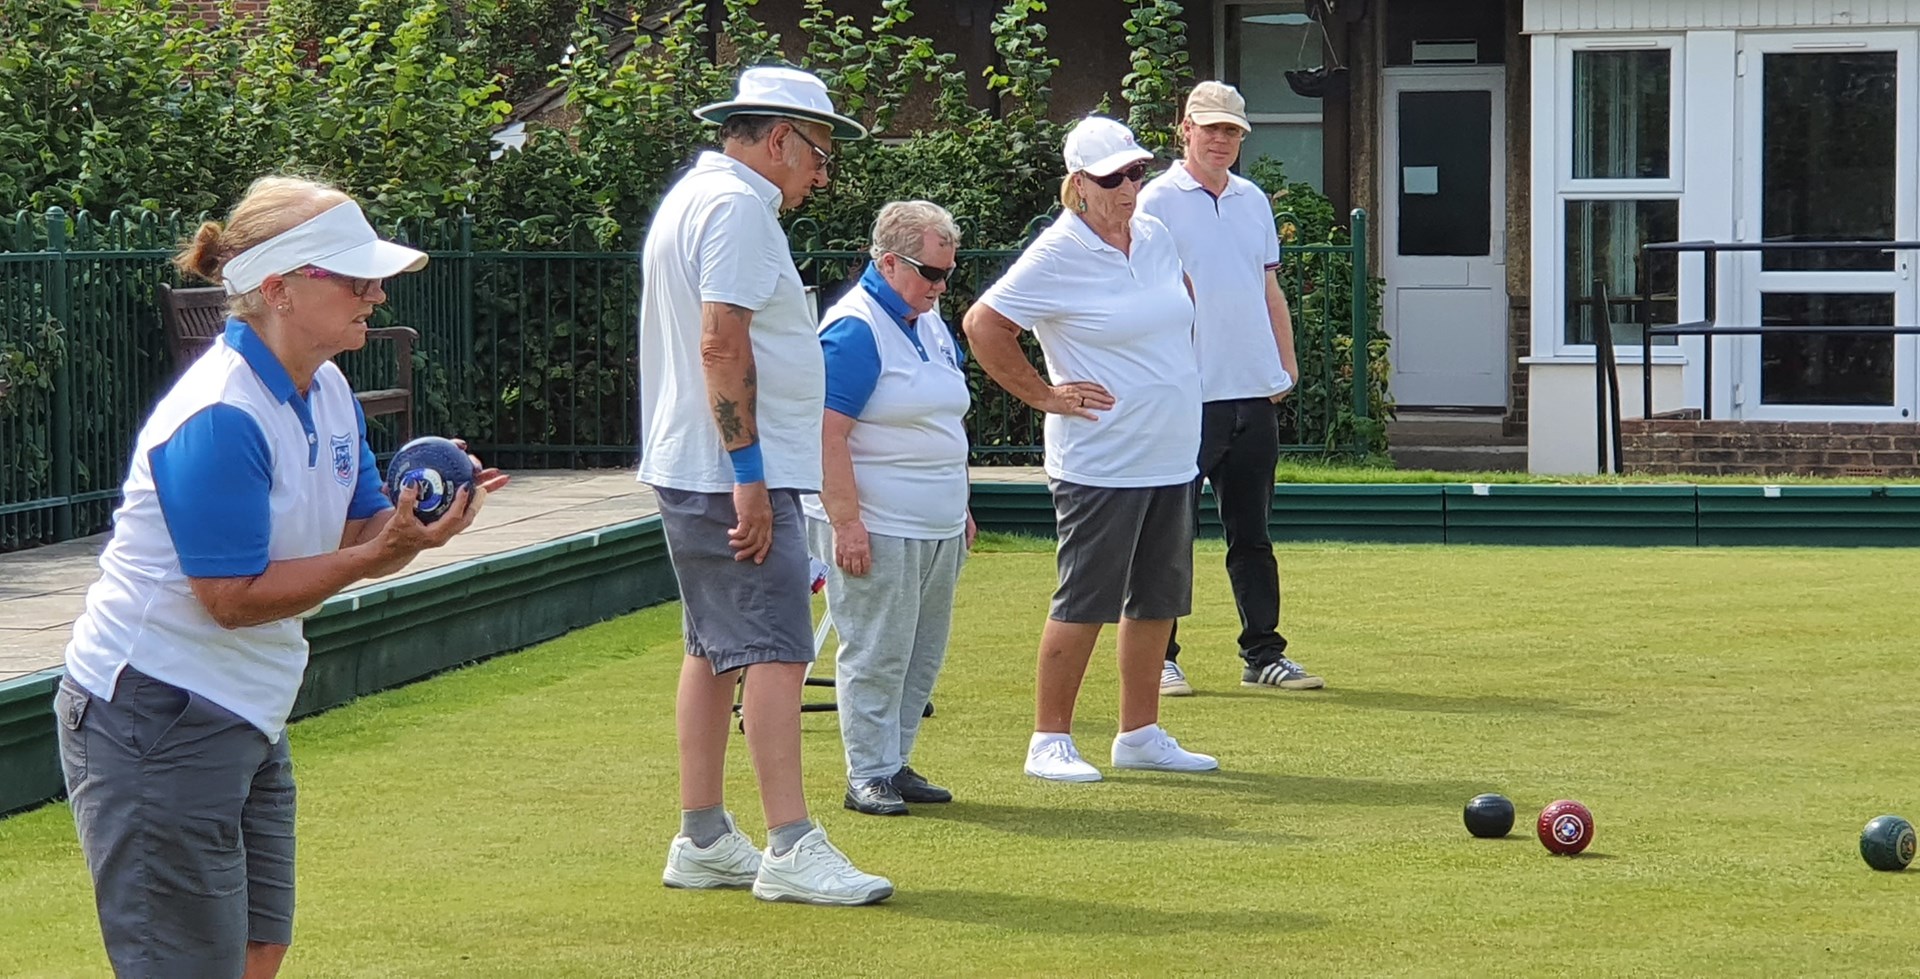 Lesley Ball, Linda May and Yvonne Kirkby-Bott playing in the friendly match against Tivoli